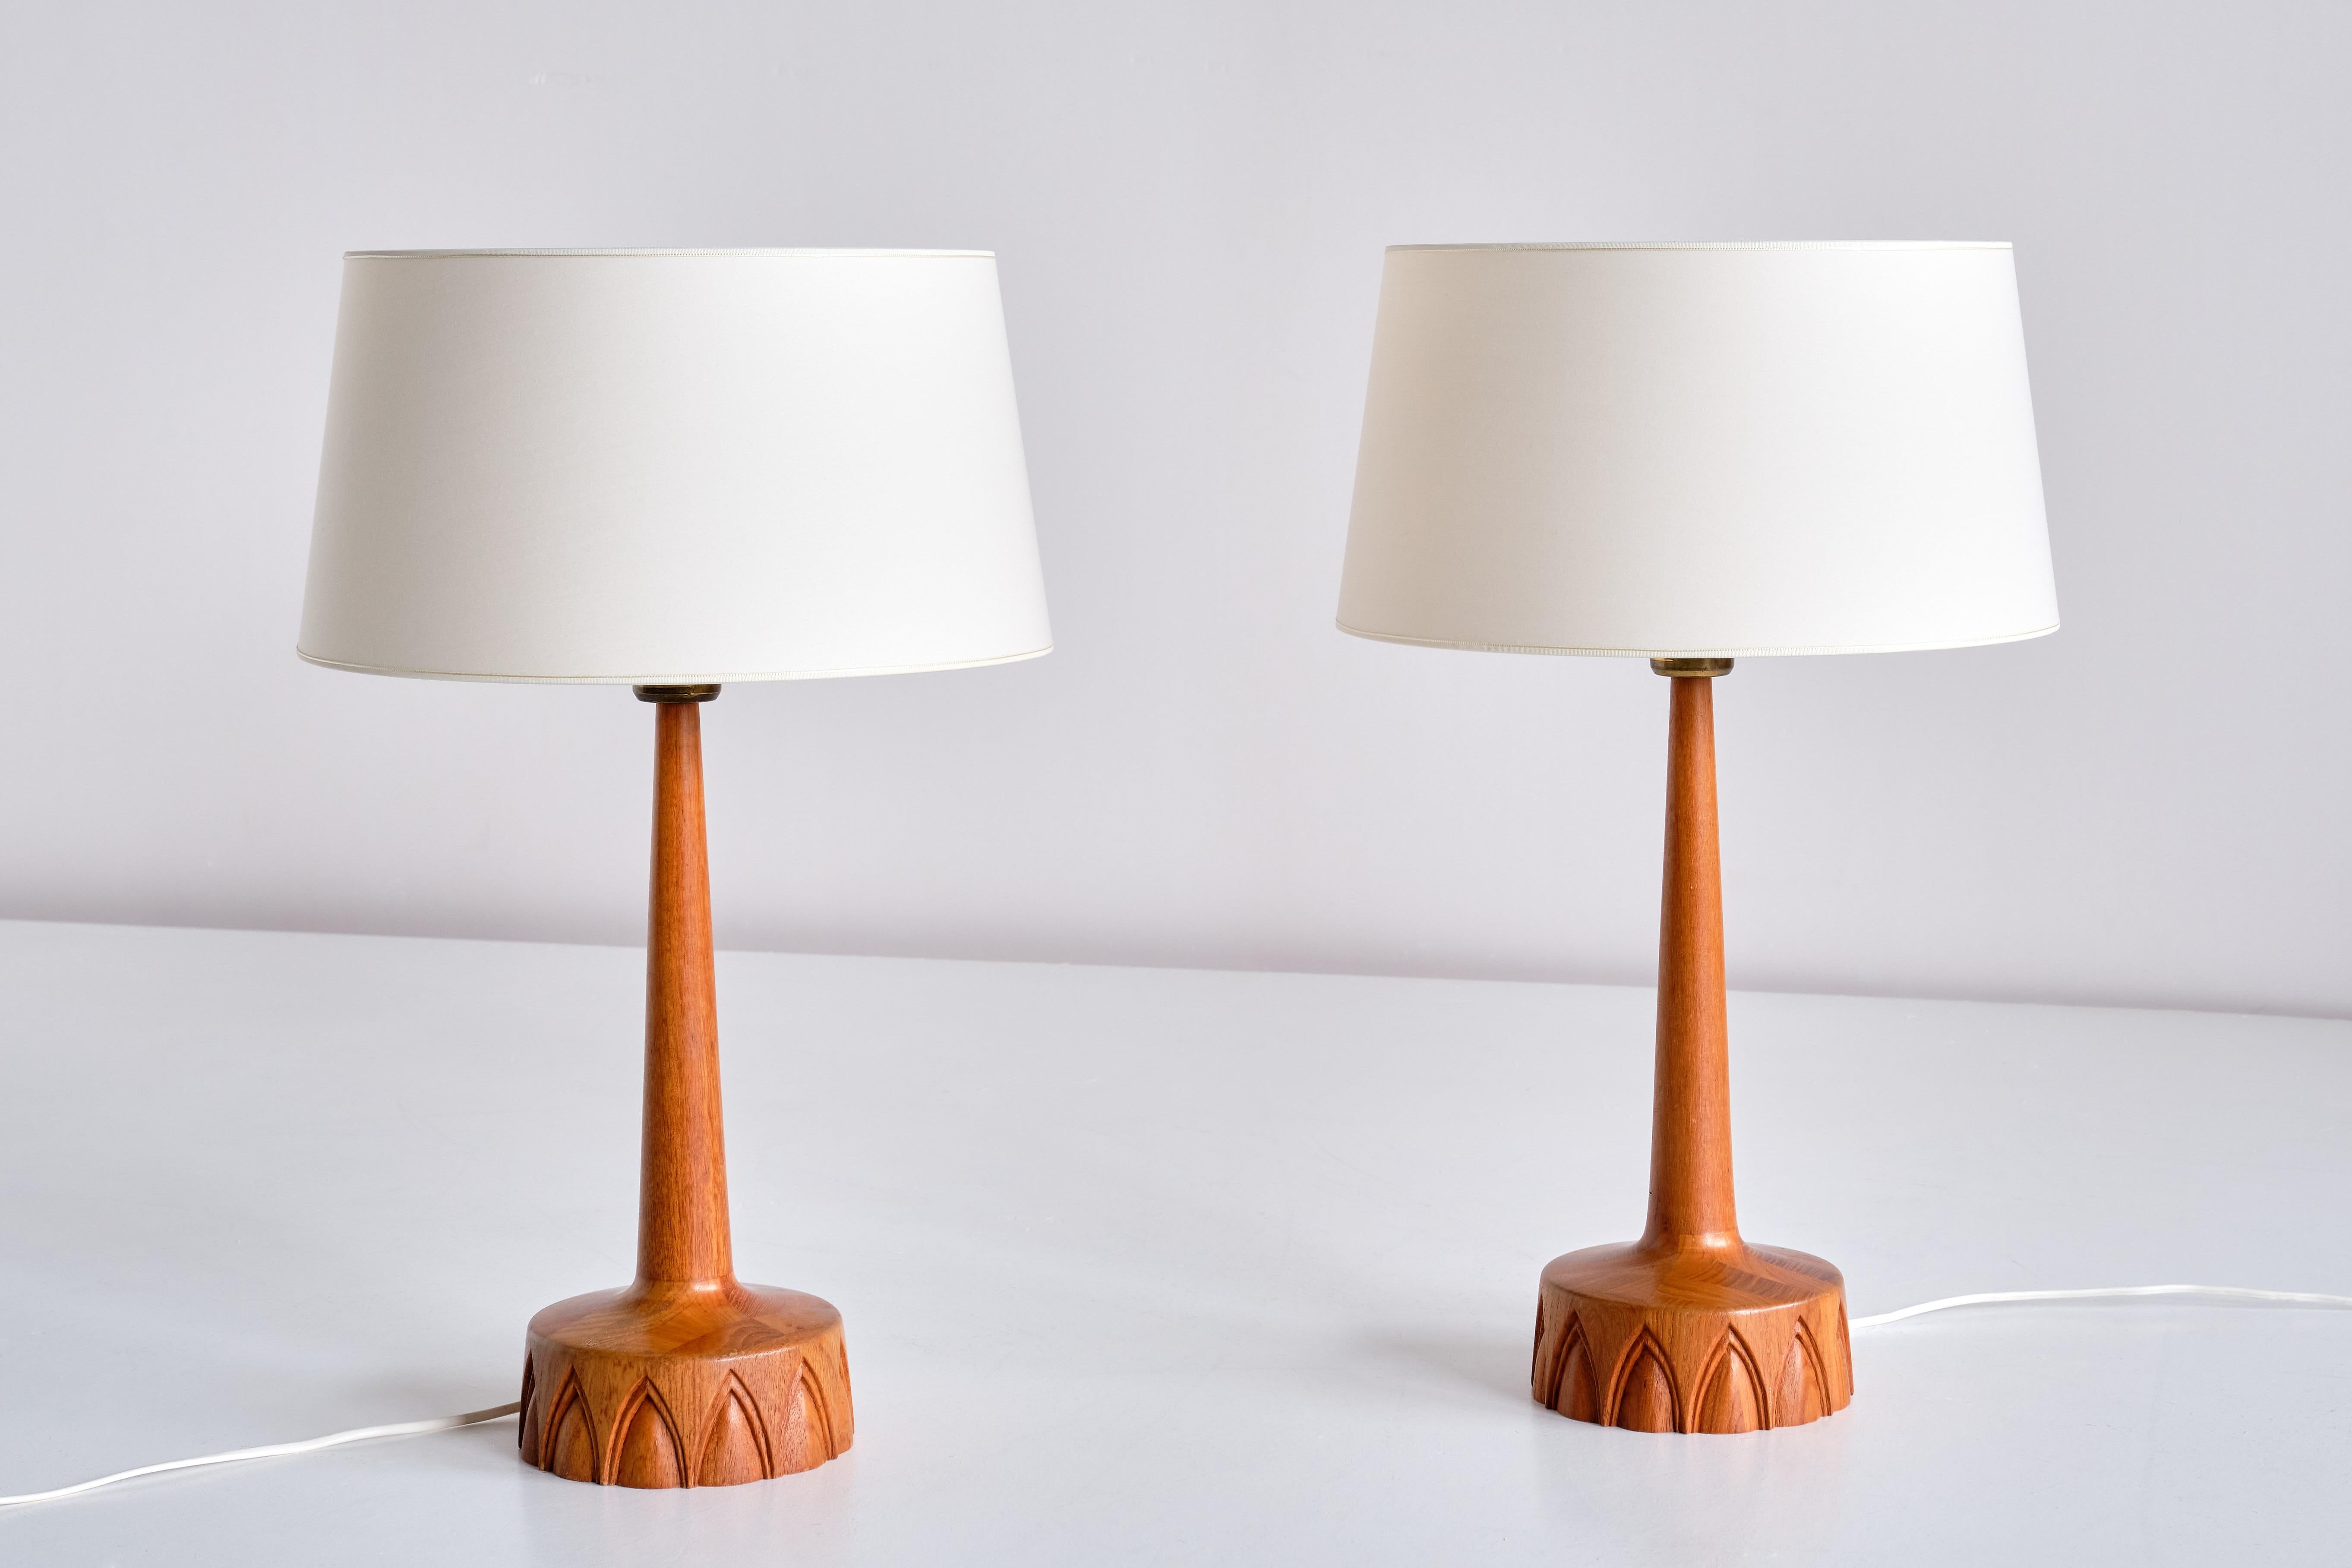 This elegant pair of table lamps was produced by AB Stilarmatur Tranås in Sweden in the 1960s. Made of teak wood, the circular bases have an interesting hand carved arched motif throughout. The light switch is a push button on the socket. Newly made